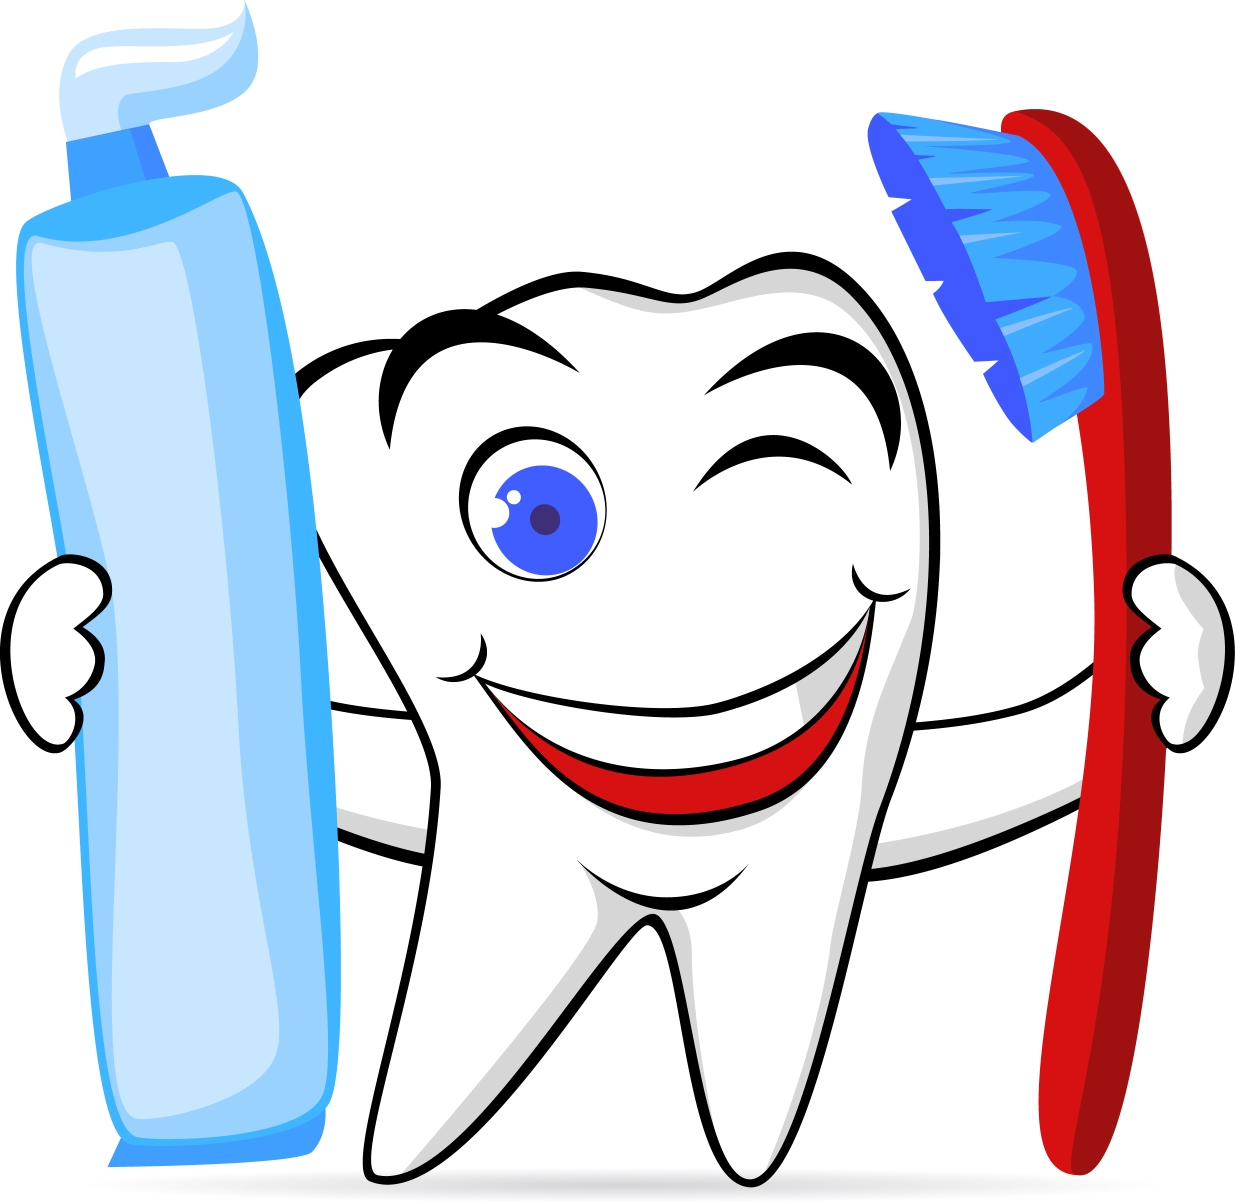 Tooth toothbrush and paste clipart clipart